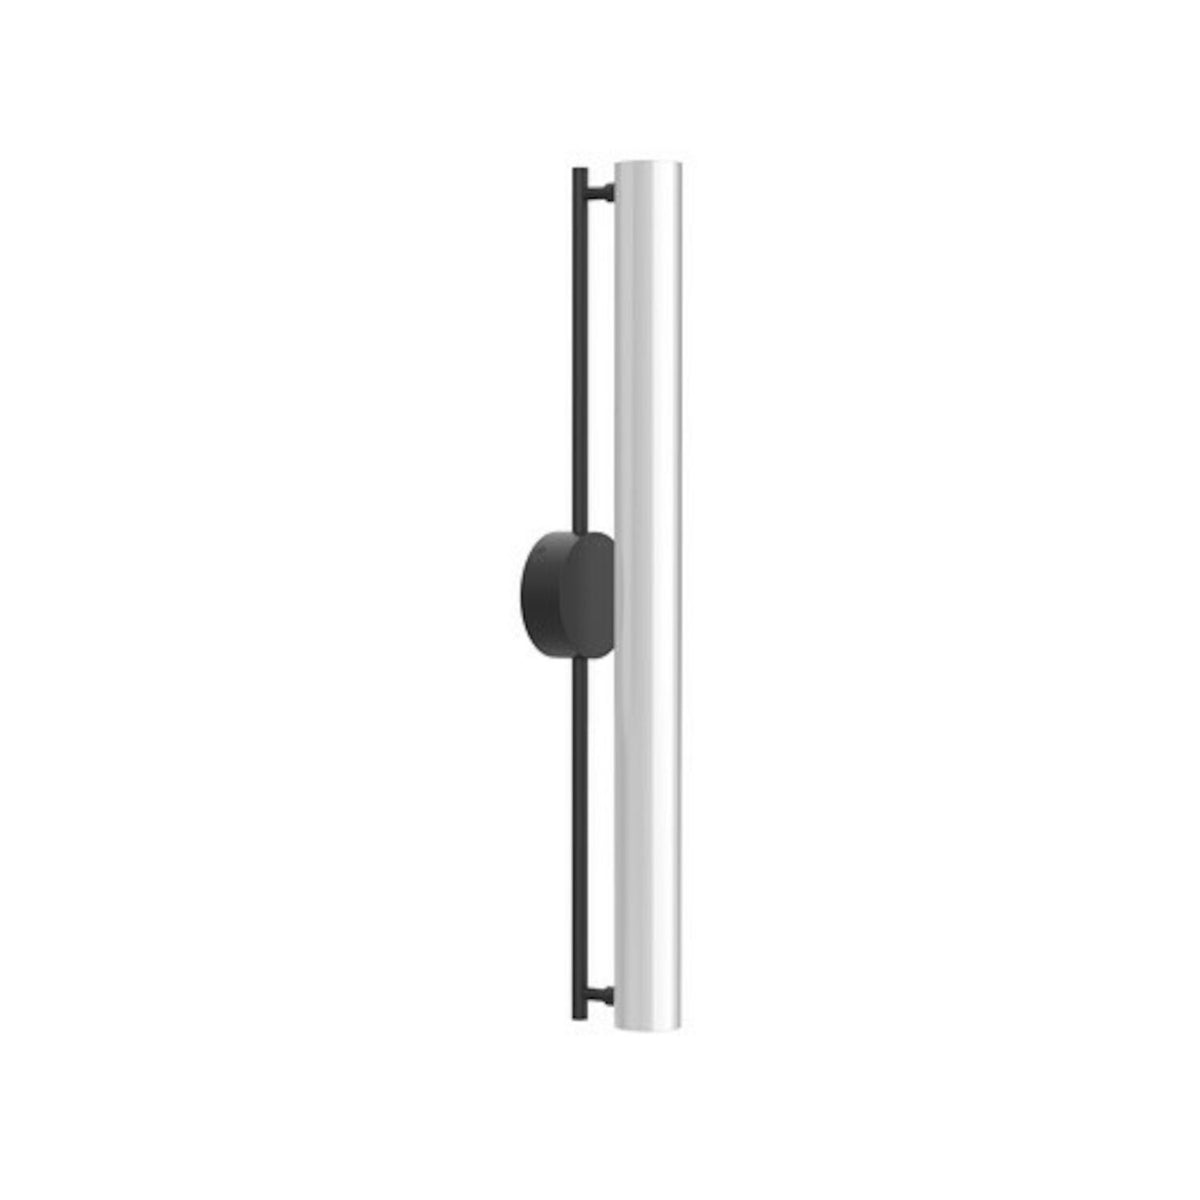 GRAMERCY 30" LED WALL SCONCE